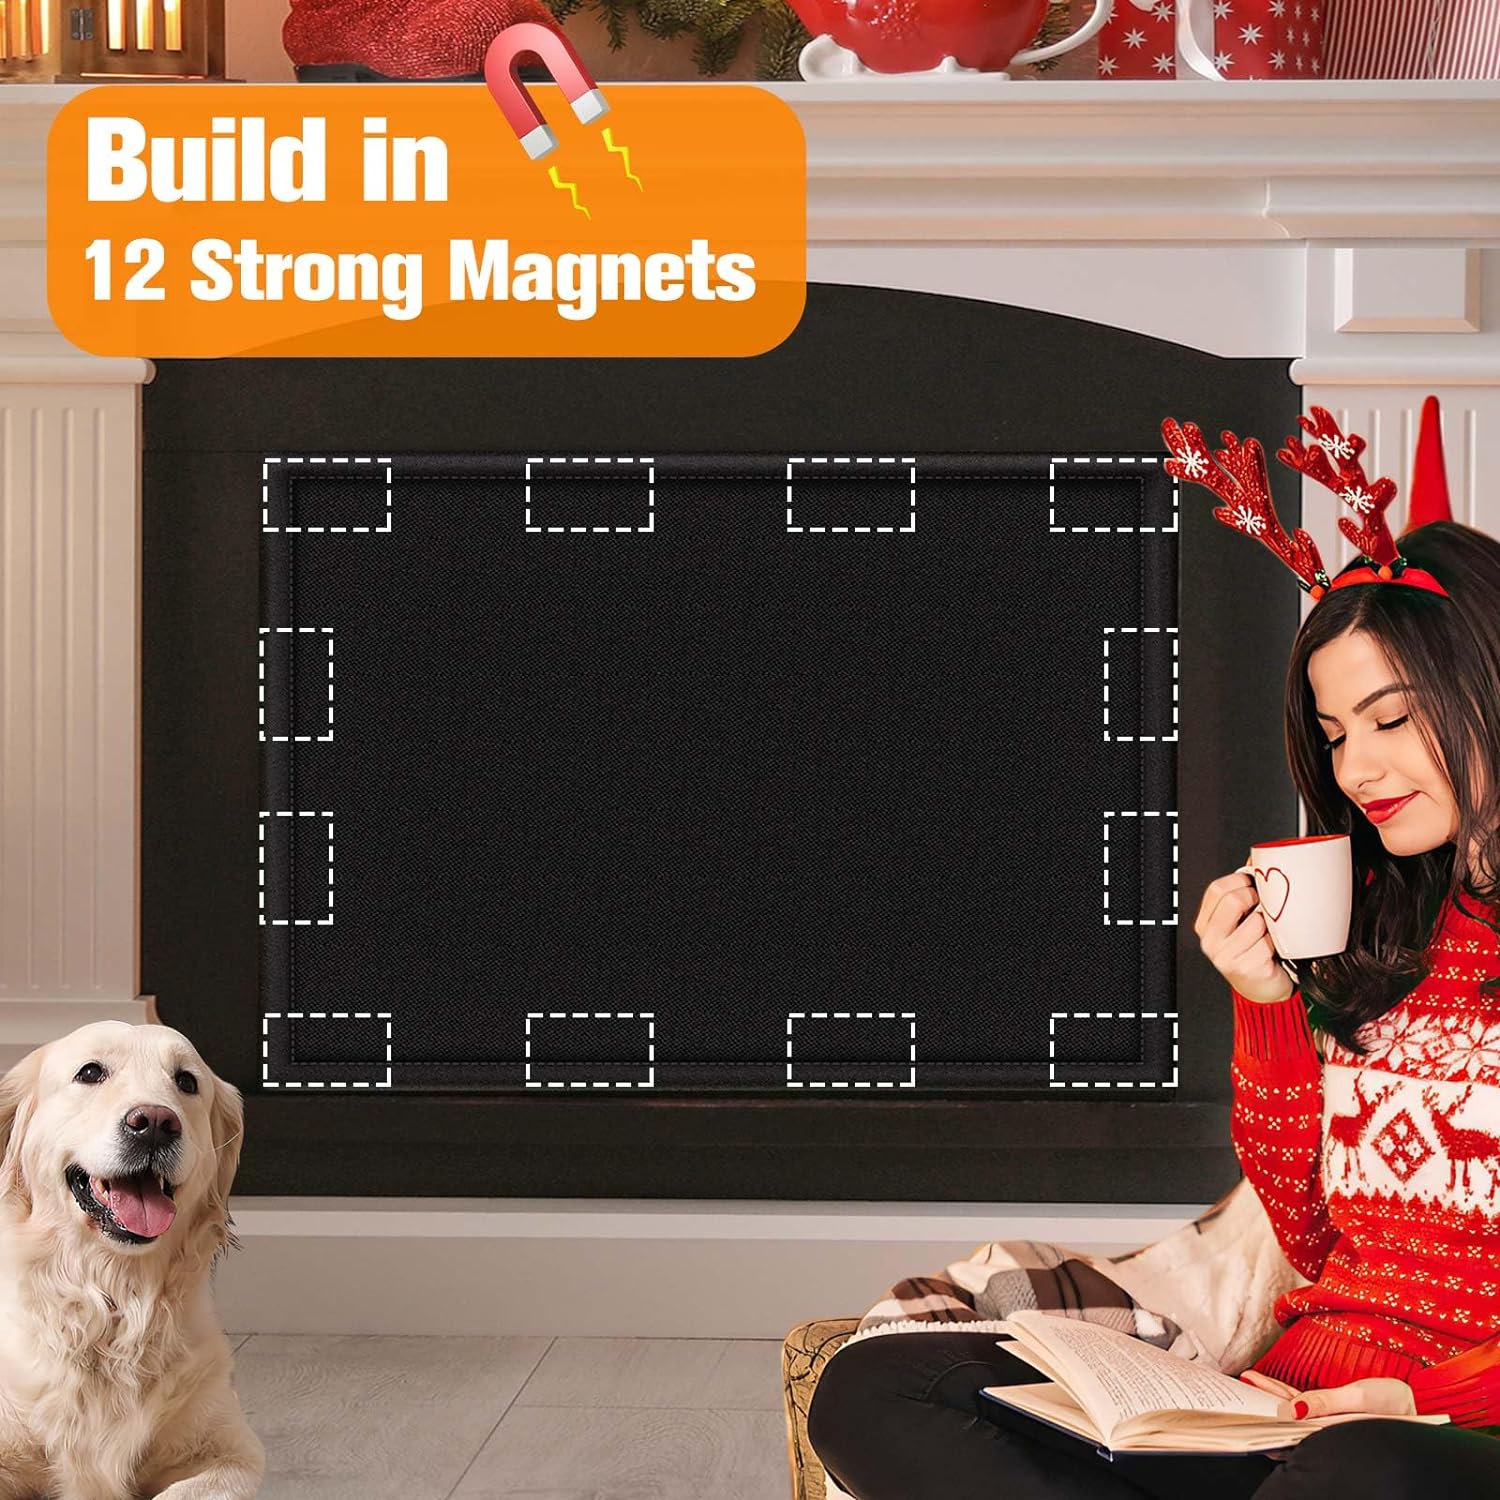 Magnetic Fireplace Blanket for Heat Loss Indoor Fireplace Covers Keep Drafts Out Stops Heat Loss Fireplace Draft Stopper with Built-In 12 Strong